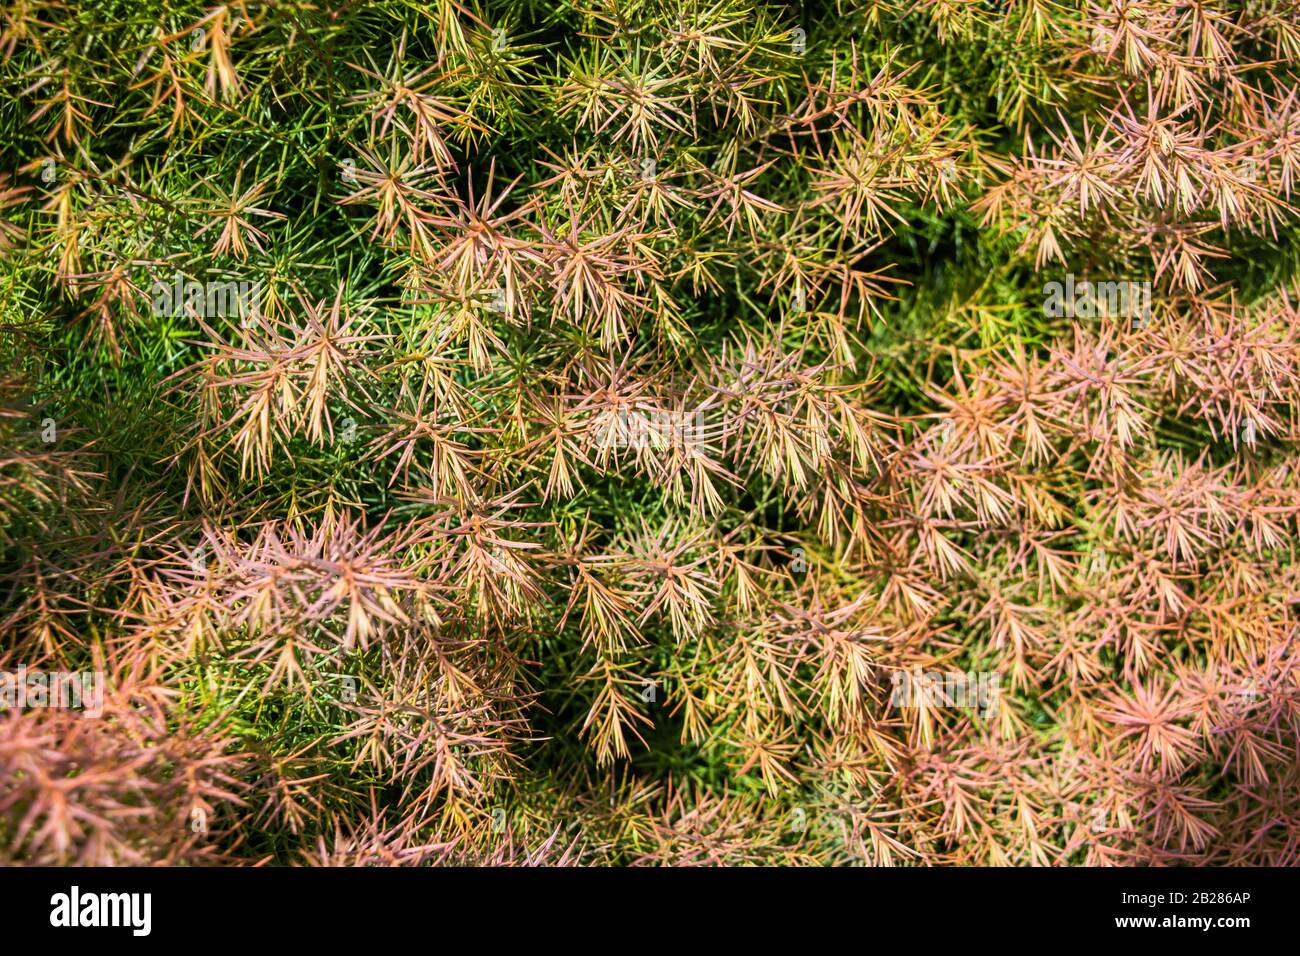 A close up of the leaves or needles of  the Japanese Red Cedar Cryptomeria elegans showing colouring from green through to red in late winter Stock Photo